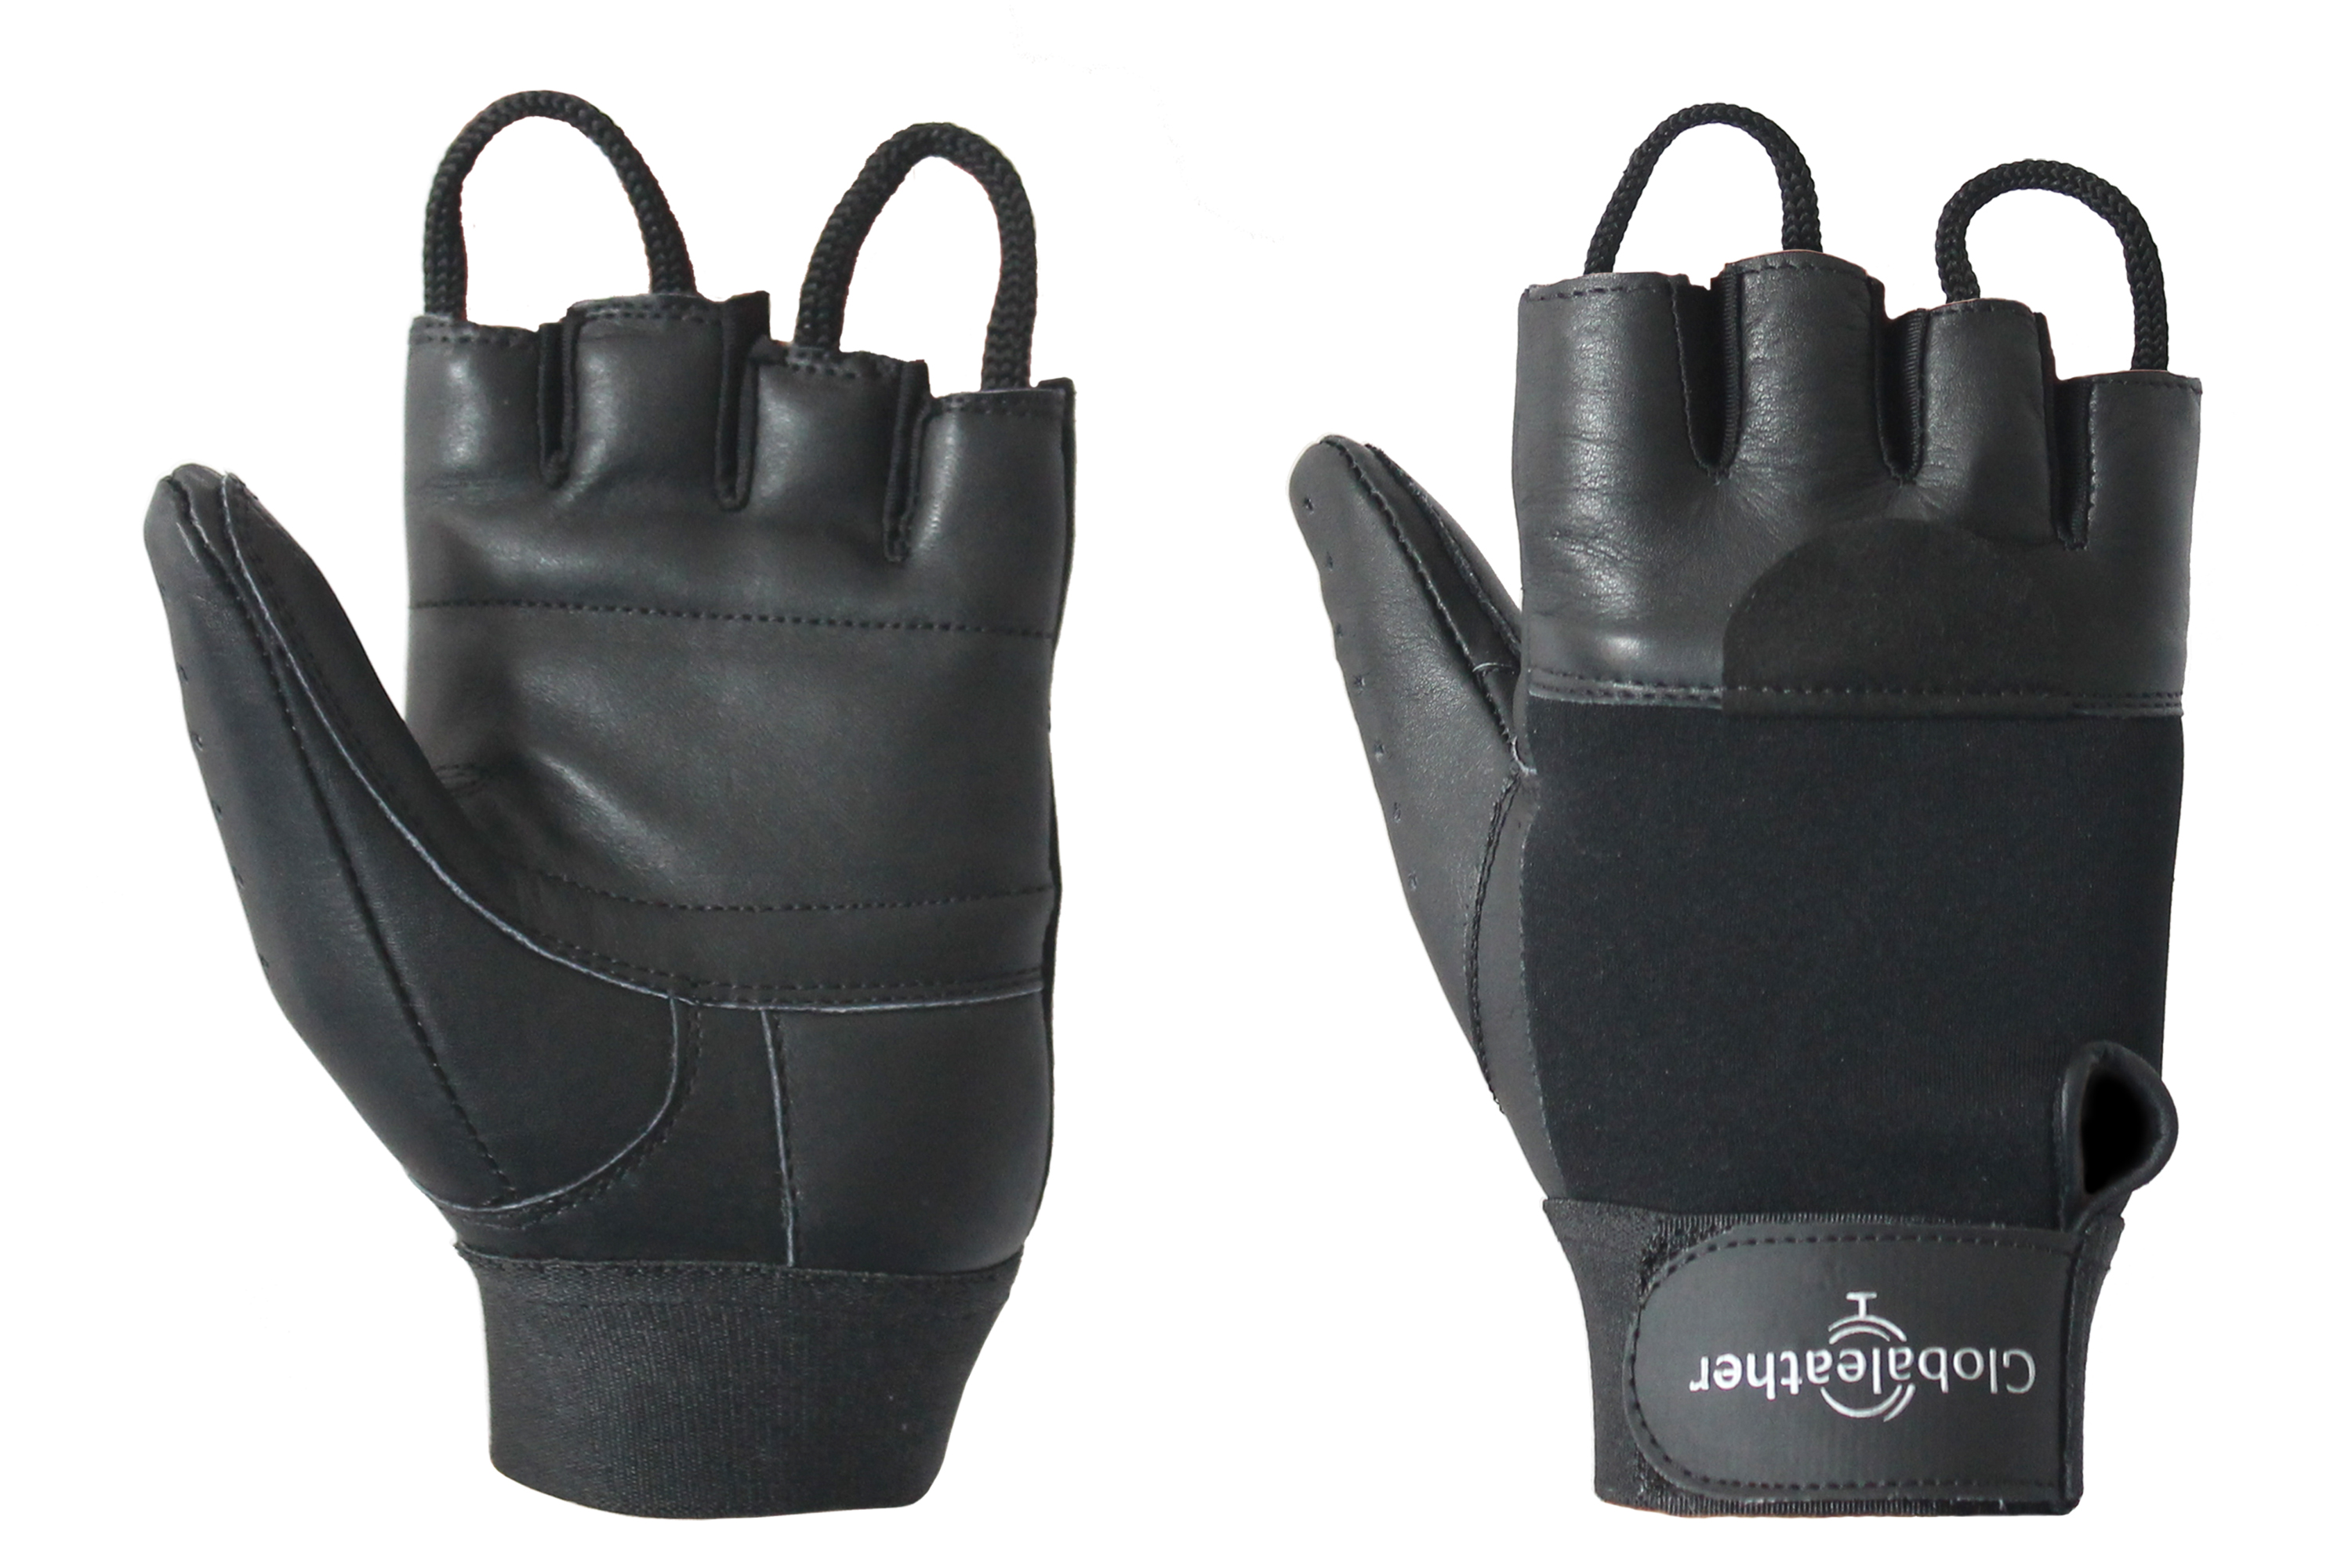 Black or Brown Wheelchair Gloves Made from Leather.